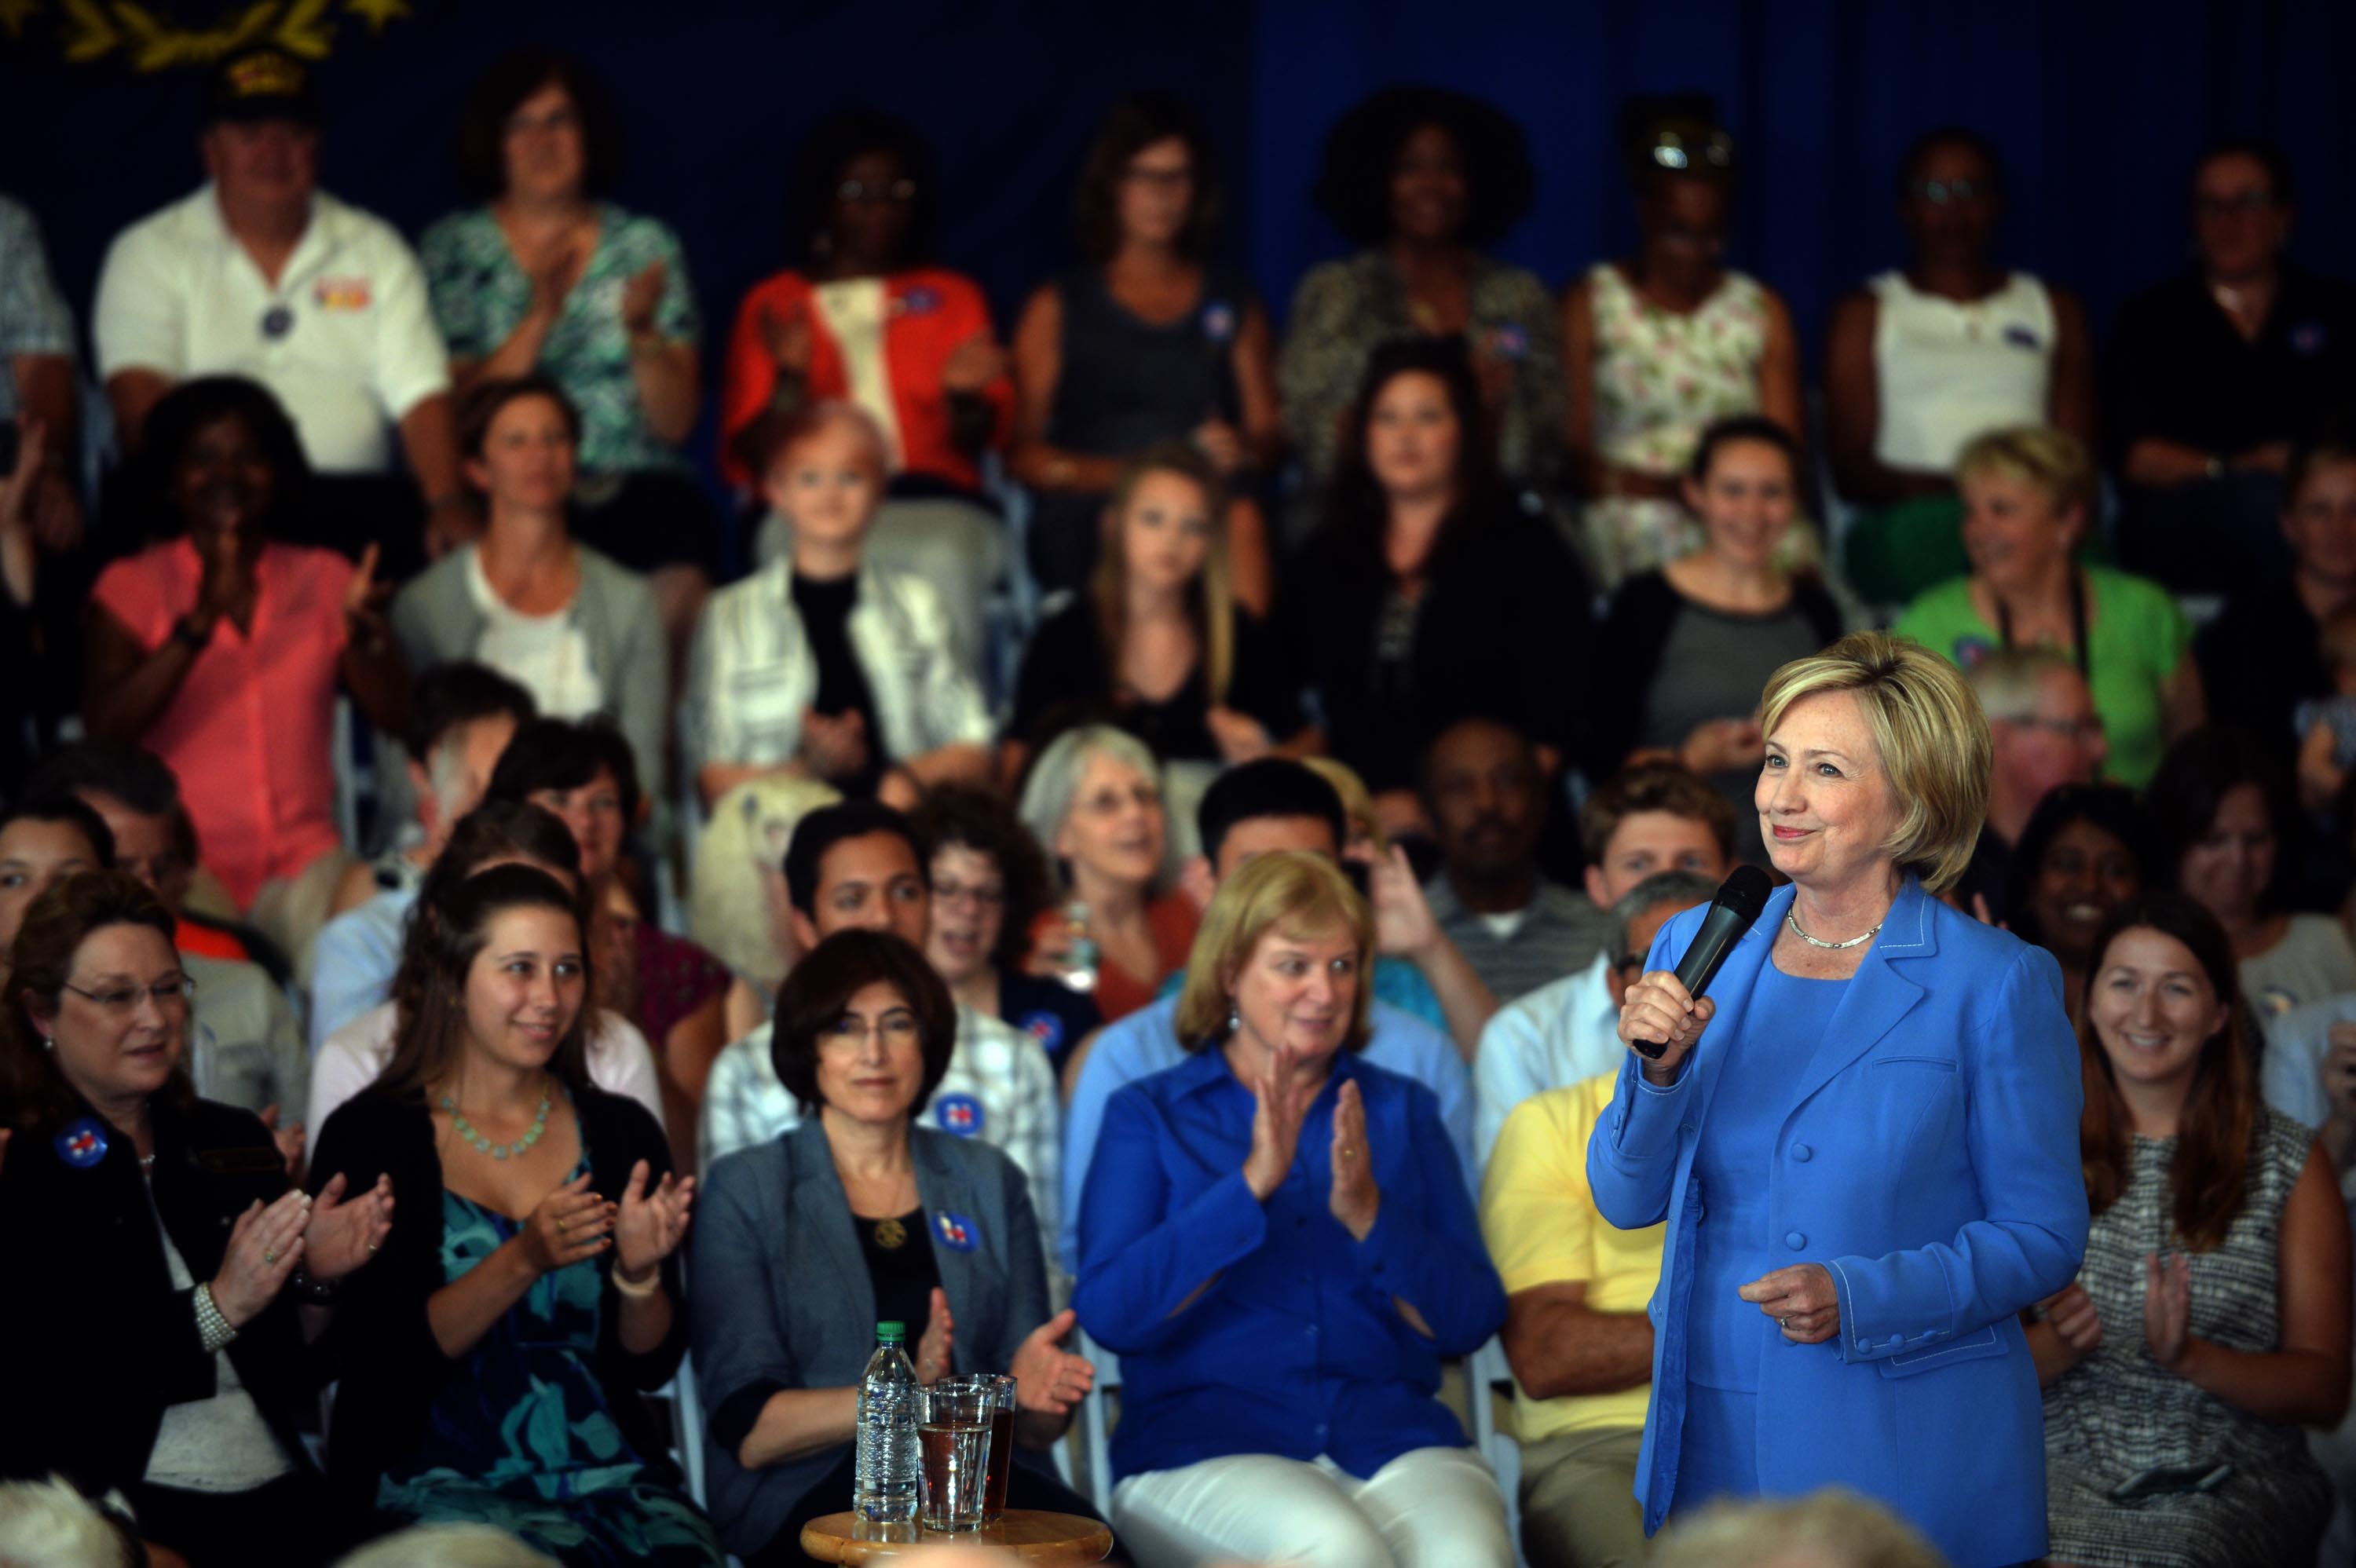 Democratic Presidential candidate Hillary Clinton speaks during a town hall event at Dover City Hall July 16, 2015 in Dover, New Hampshire. (Darren McCollester&mdash;2015 Getty Images)